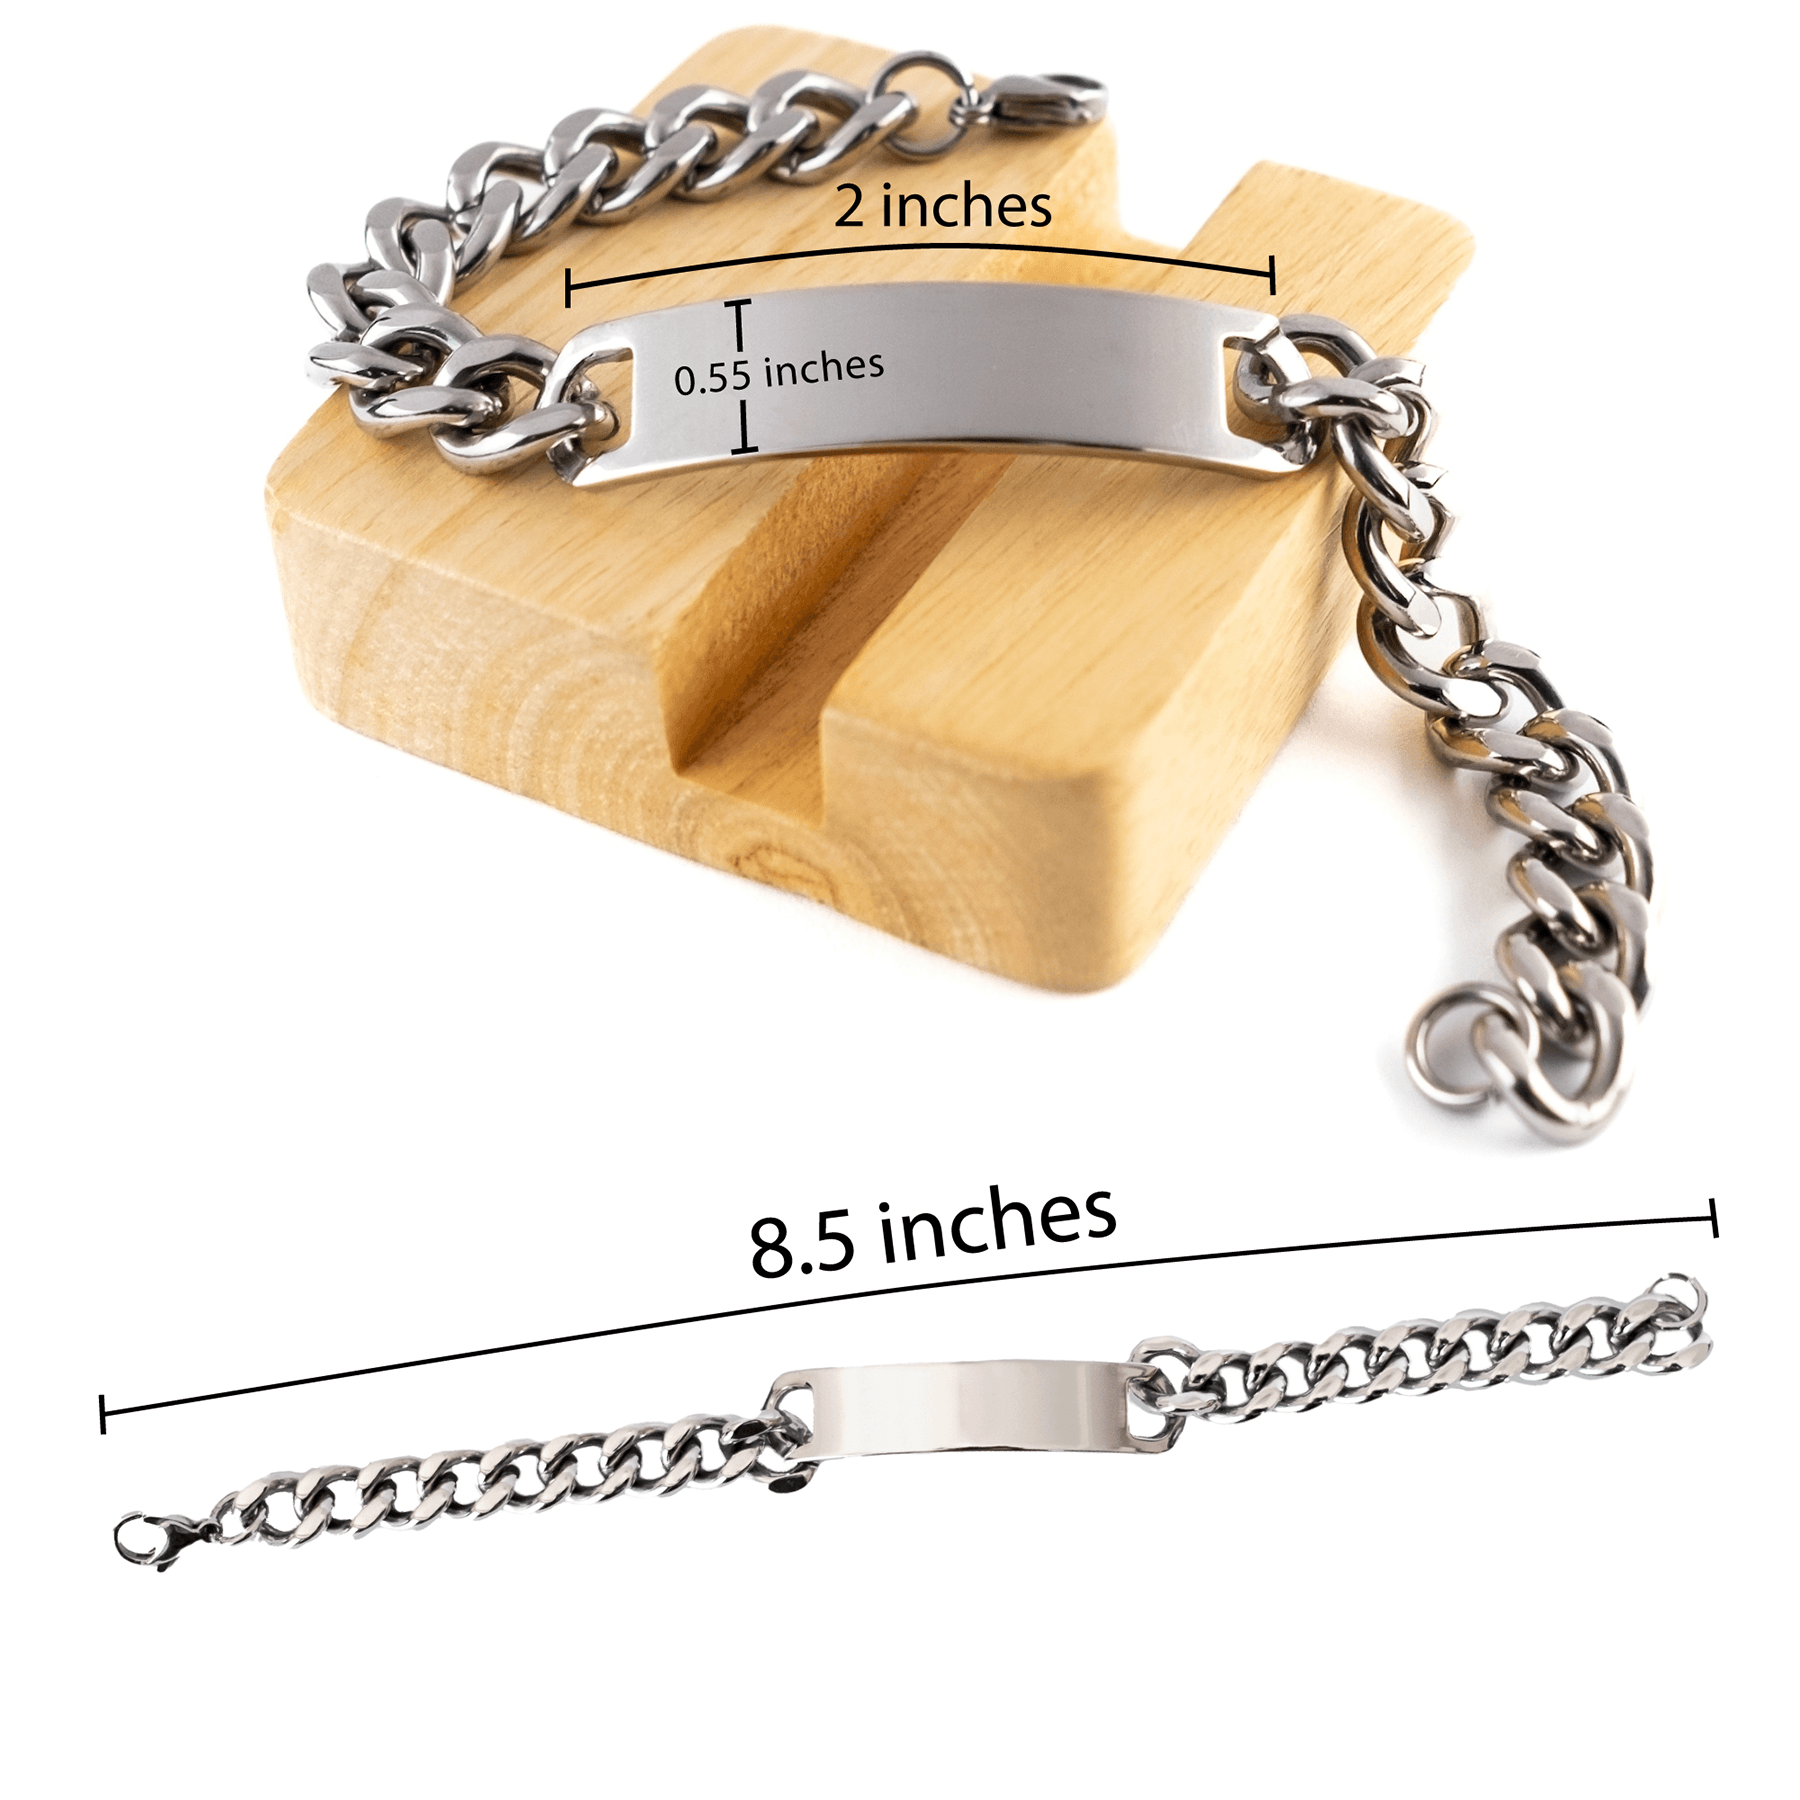 Welder Cuban Chain Link Engraved Bracelet - Thanks for being who you are - Birthday Christmas Jewelry Gifts Coworkers Colleague Boss - Mallard Moon Gift Shop